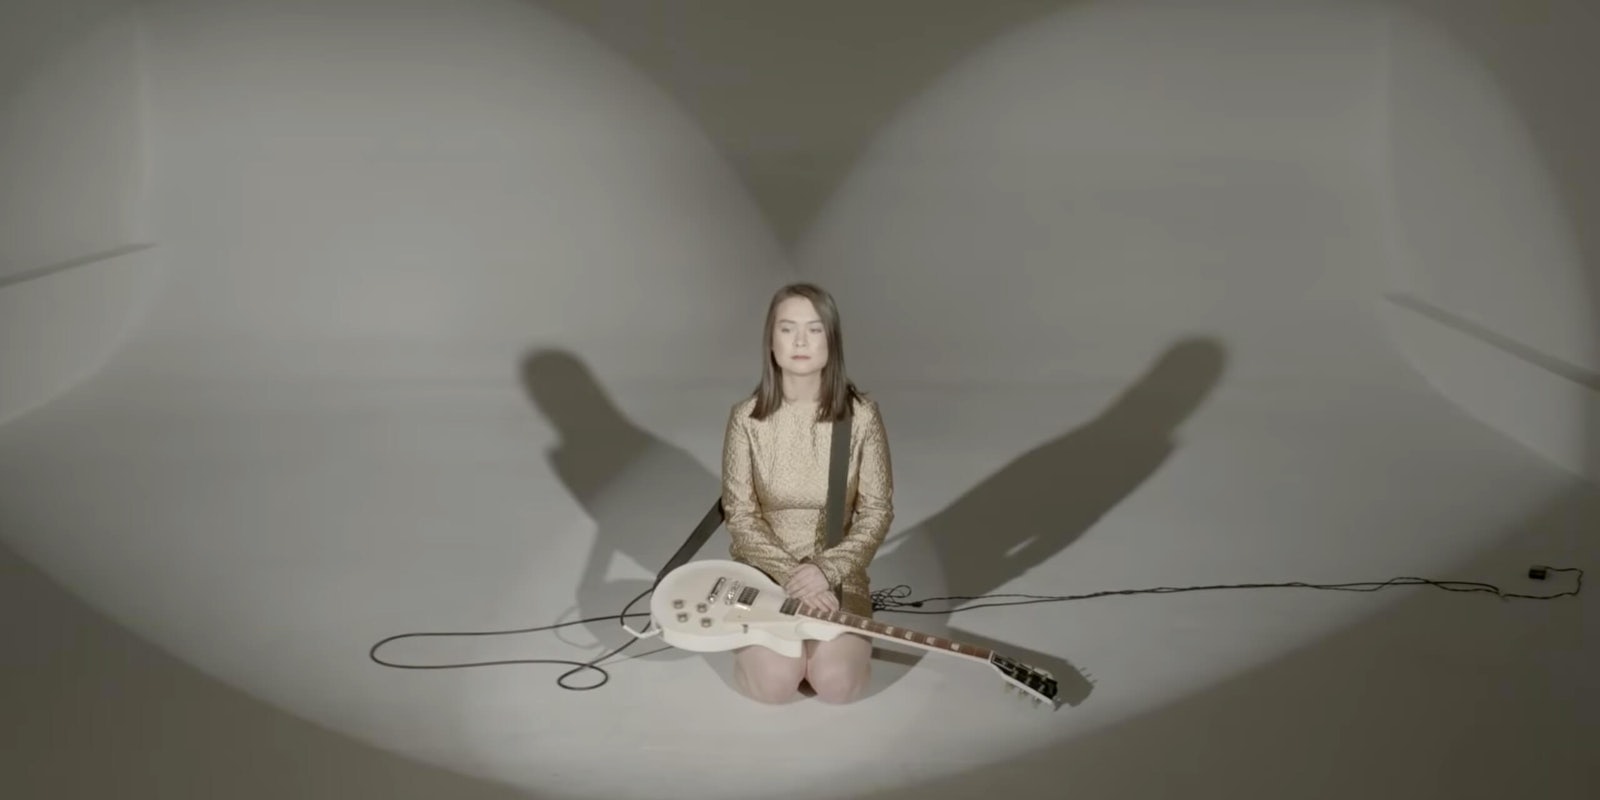 mitski-tumblr-allegations-2019-hoax-of-the-year